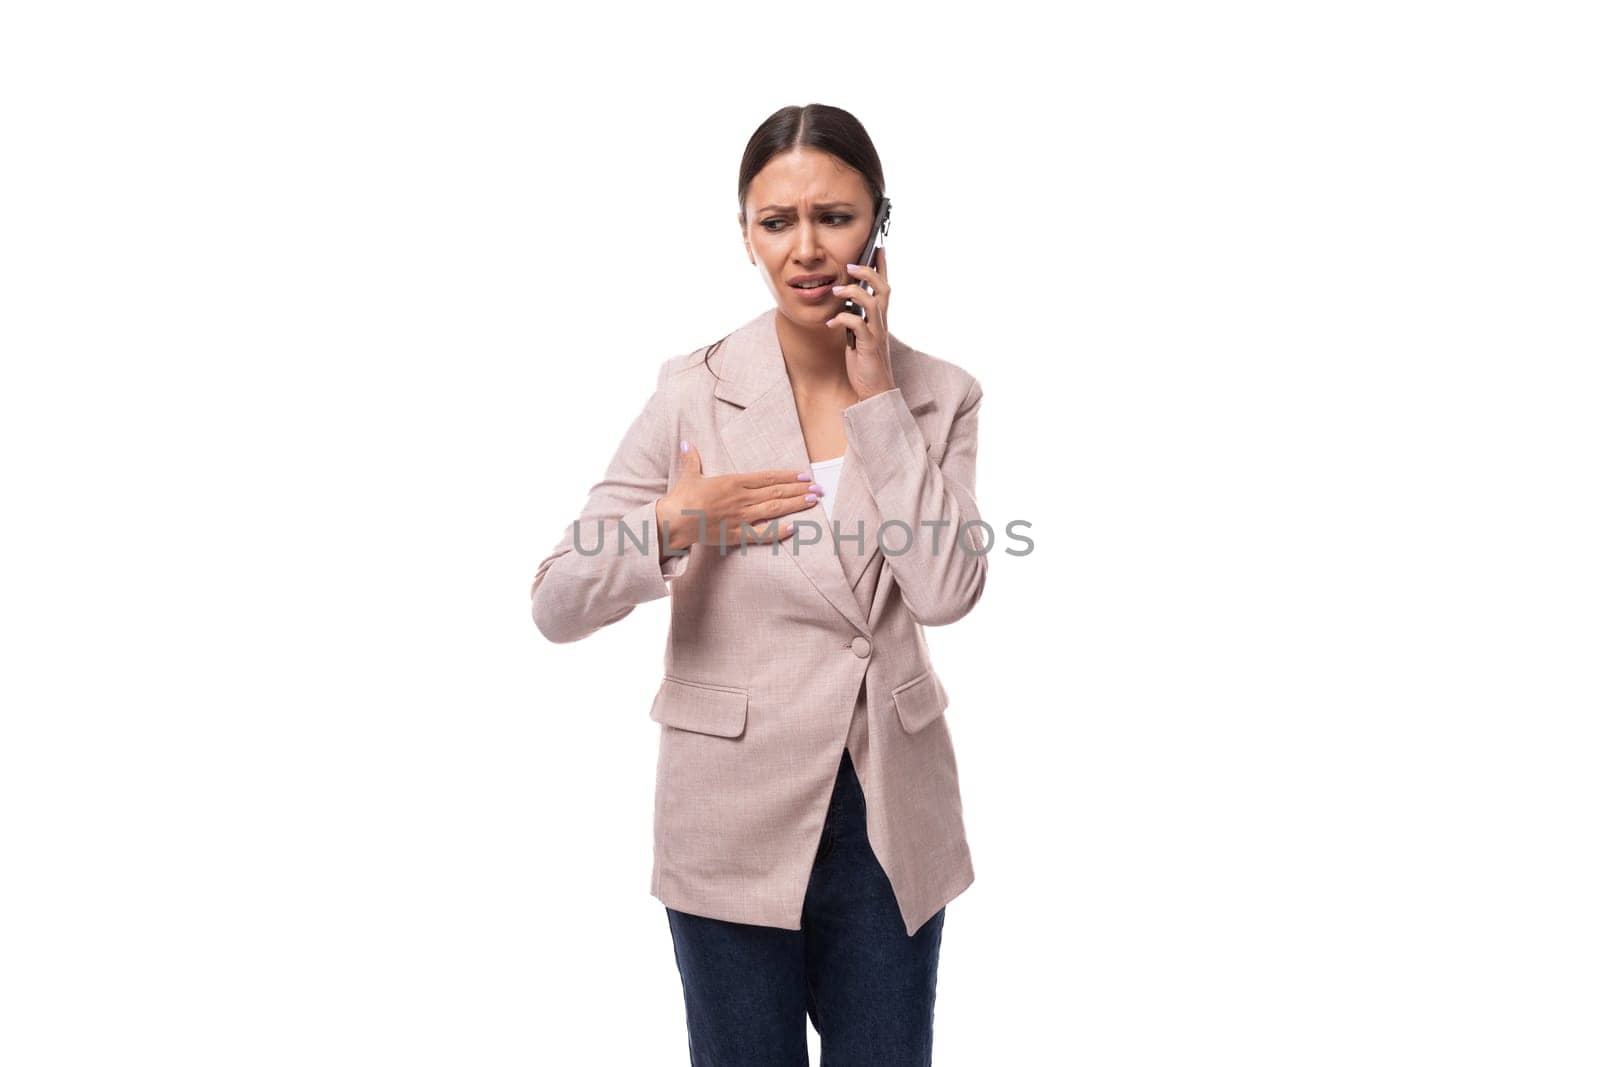 30 year old business woman with black hair wearing a beige jacket talking on the phone by TRMK